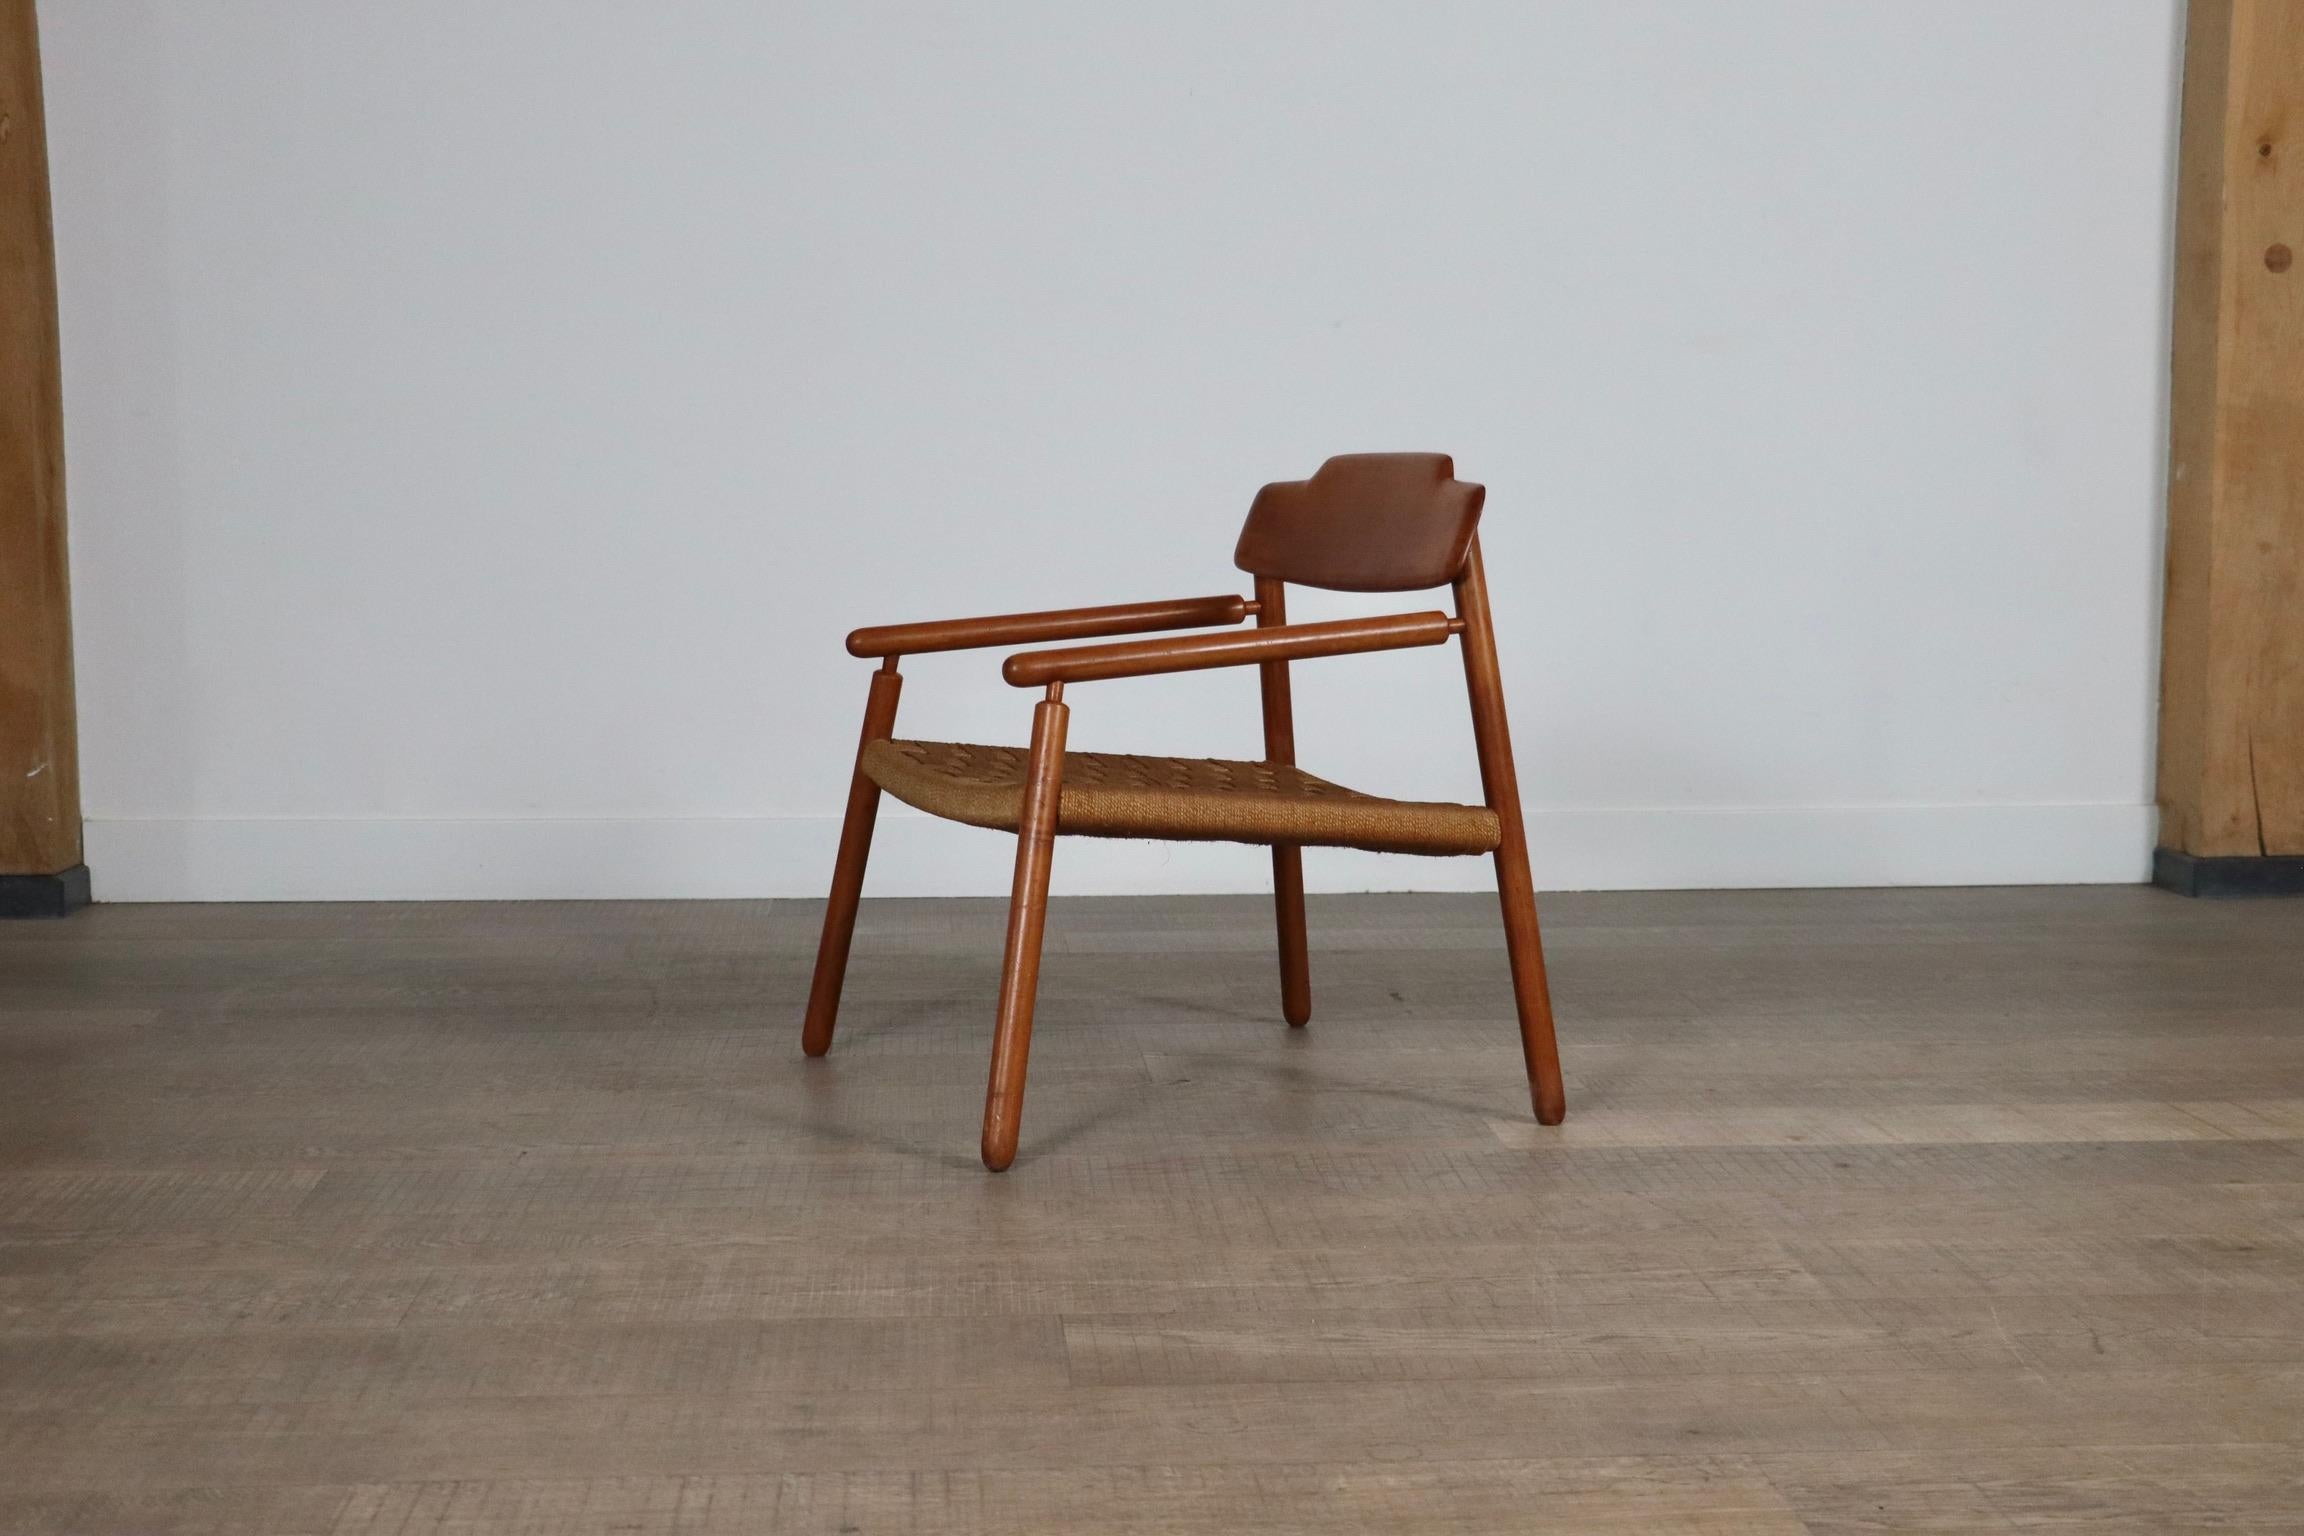 Midcentury Minimalistic Easy Chair In Oak And Papercord, Finland 1950s For Sale 5